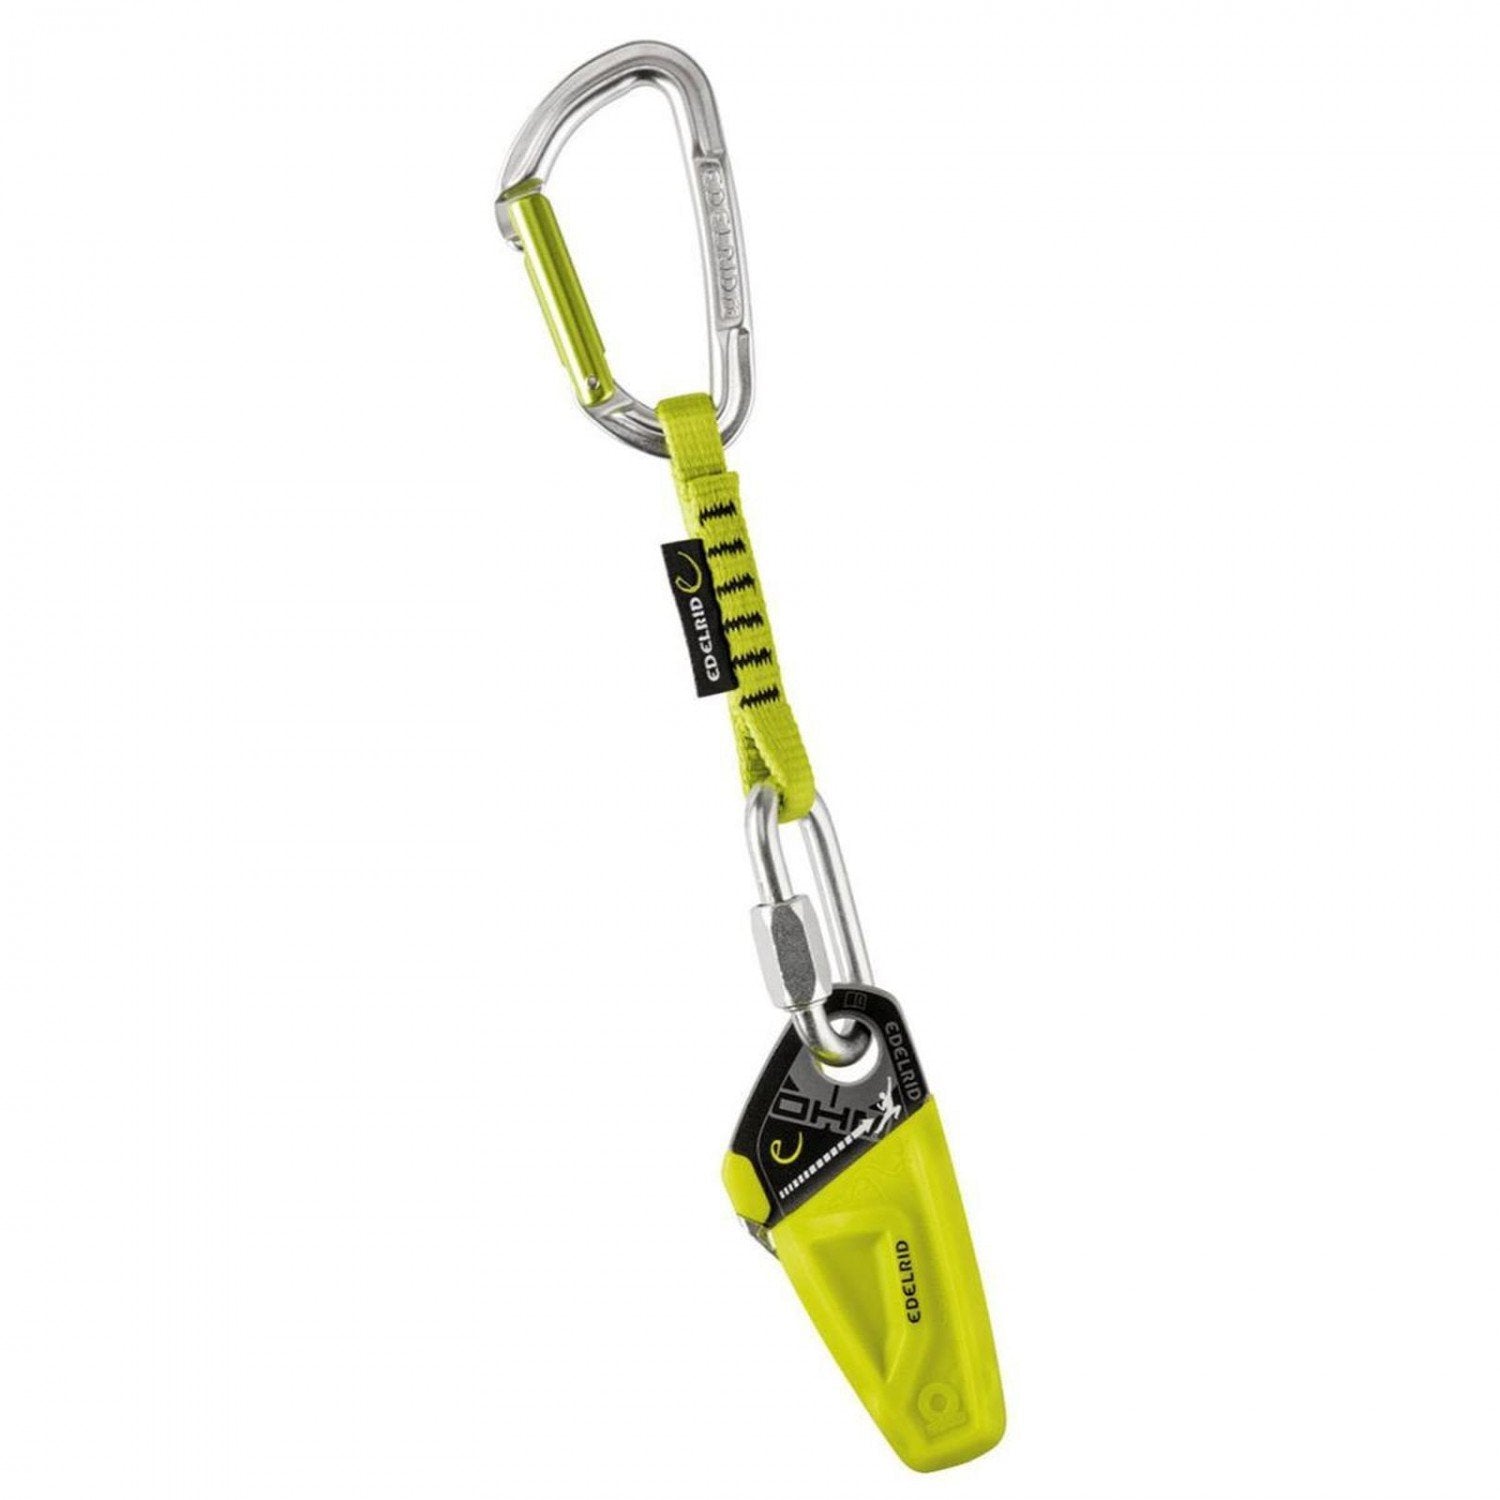 Edelrid Ohm Assisted-braking Resistor, friction climbing device shown with quickdraw in green/silver